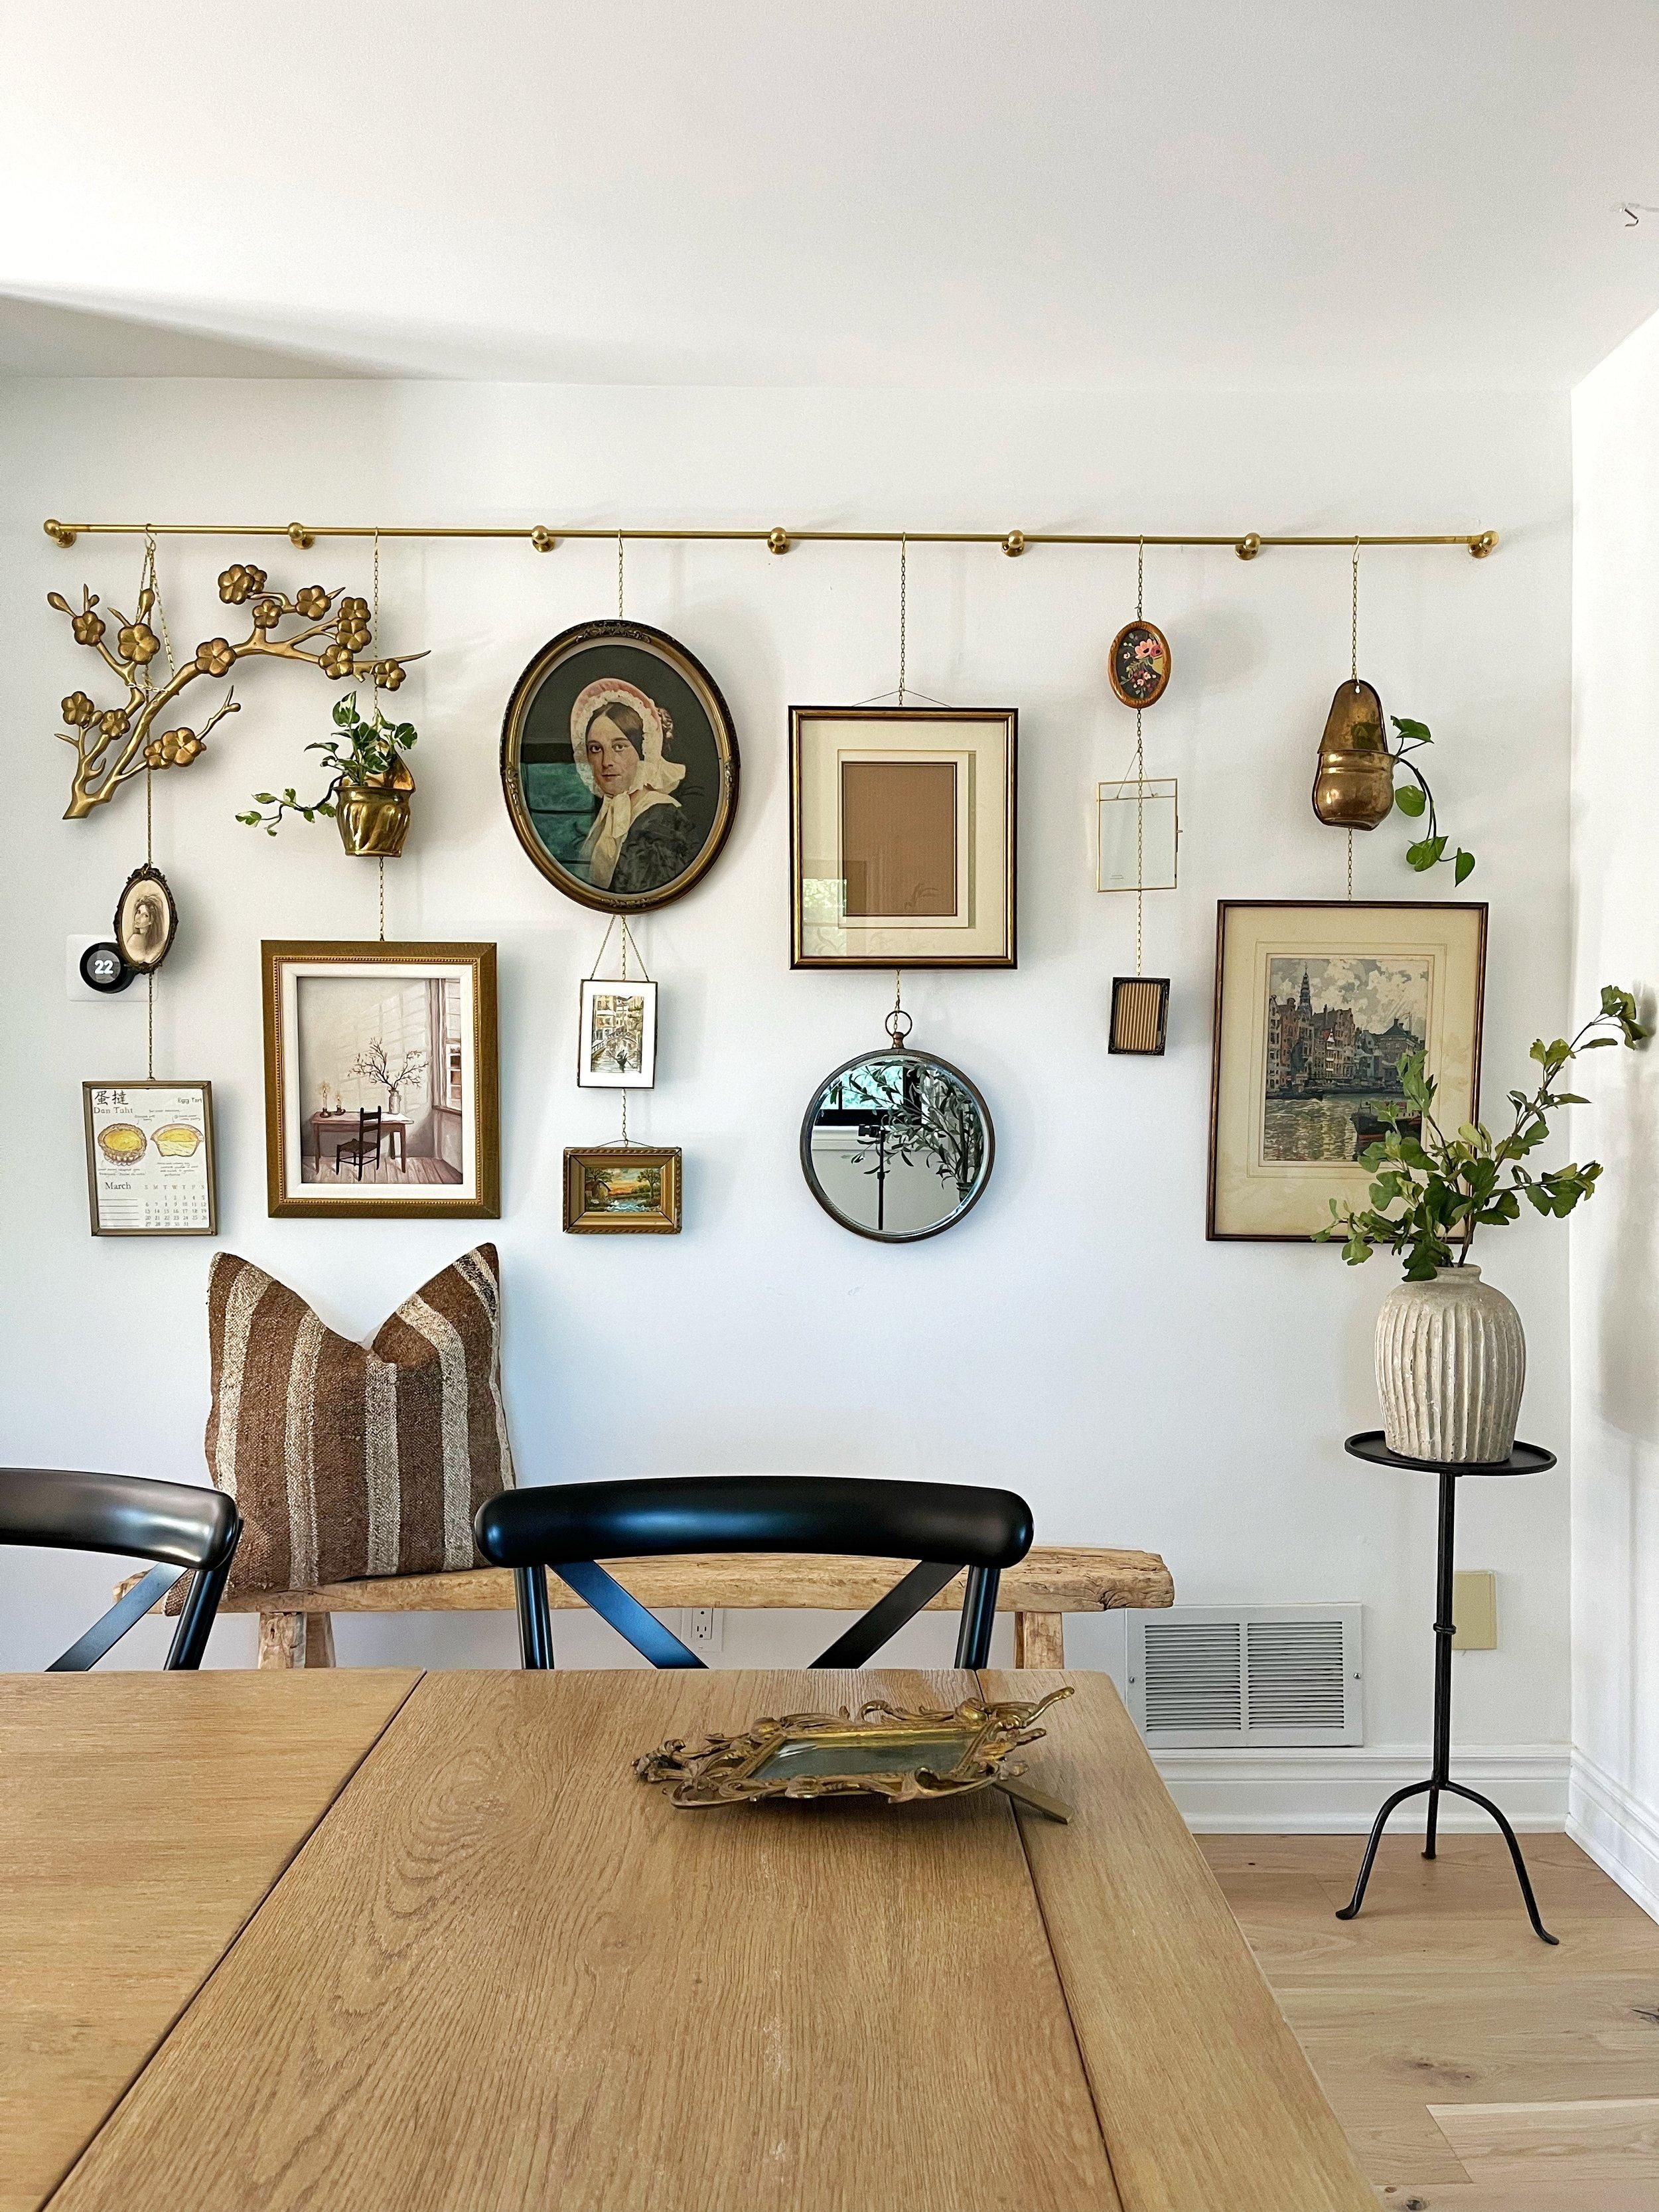 10 Unique Wall Art Display Ideas That Aren't Another Gallery Wall